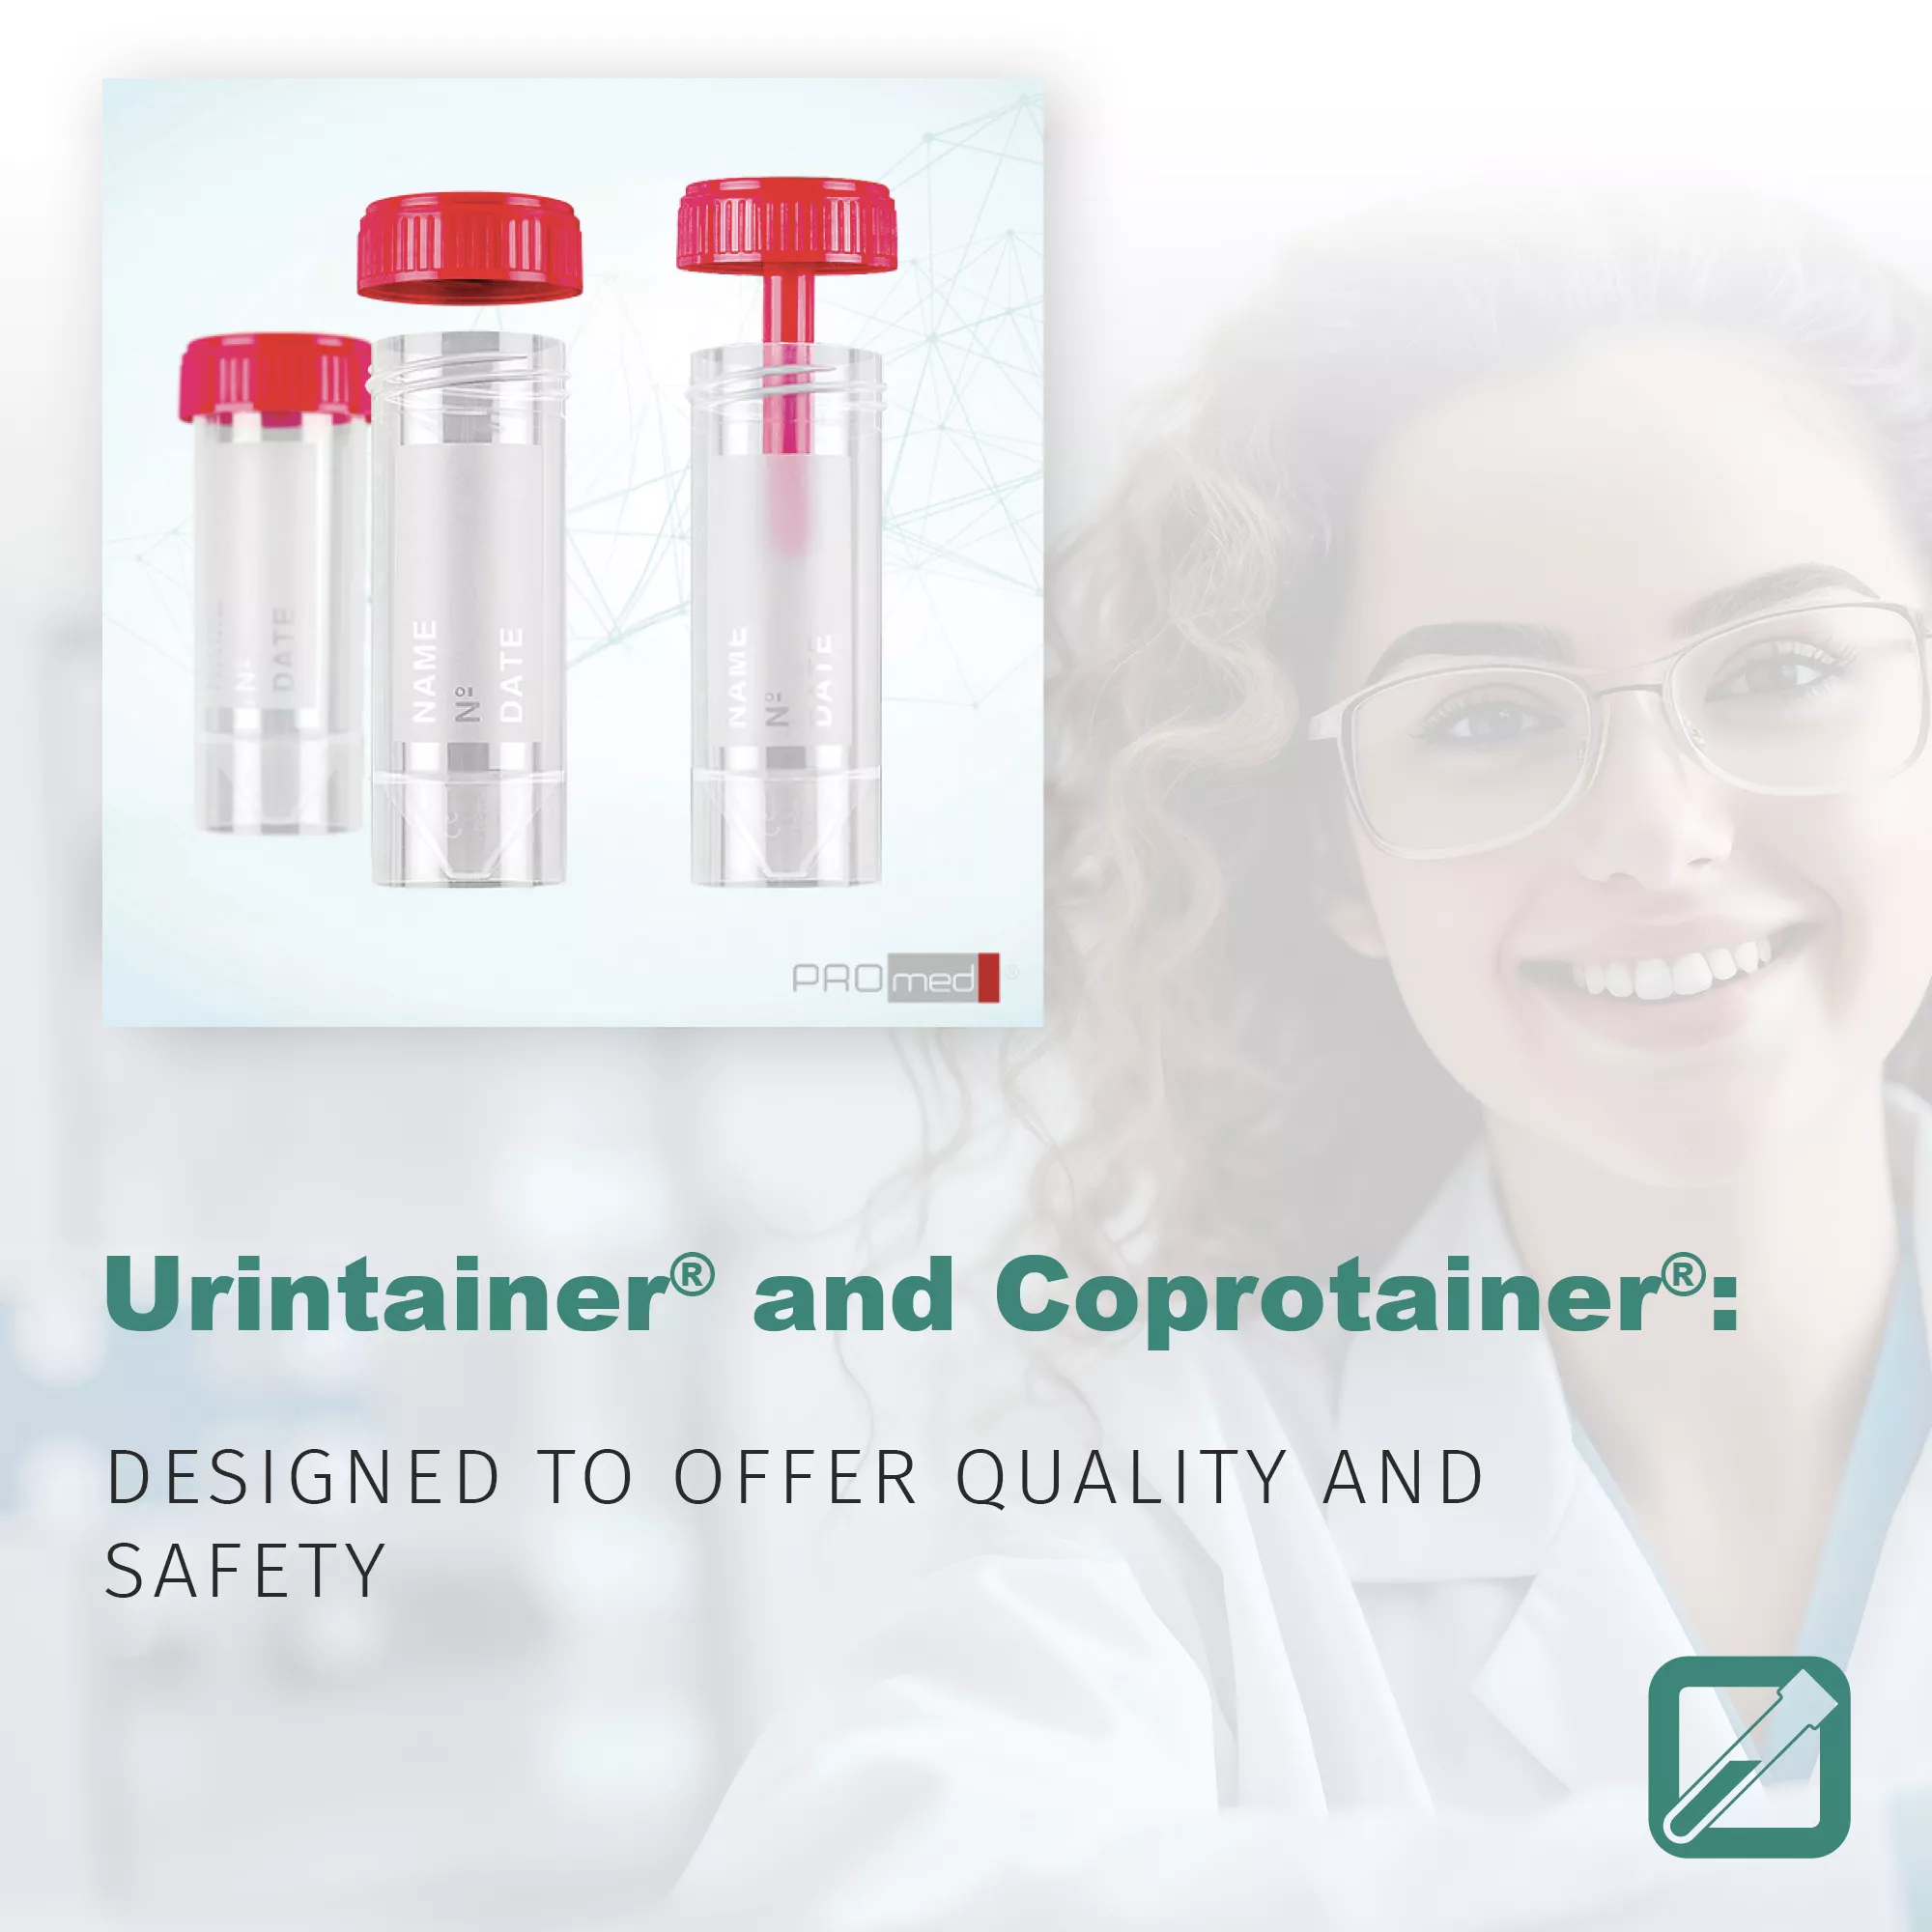 Urintainer® and Coprotainer® 30 ml: solutions for urine and faeces collection